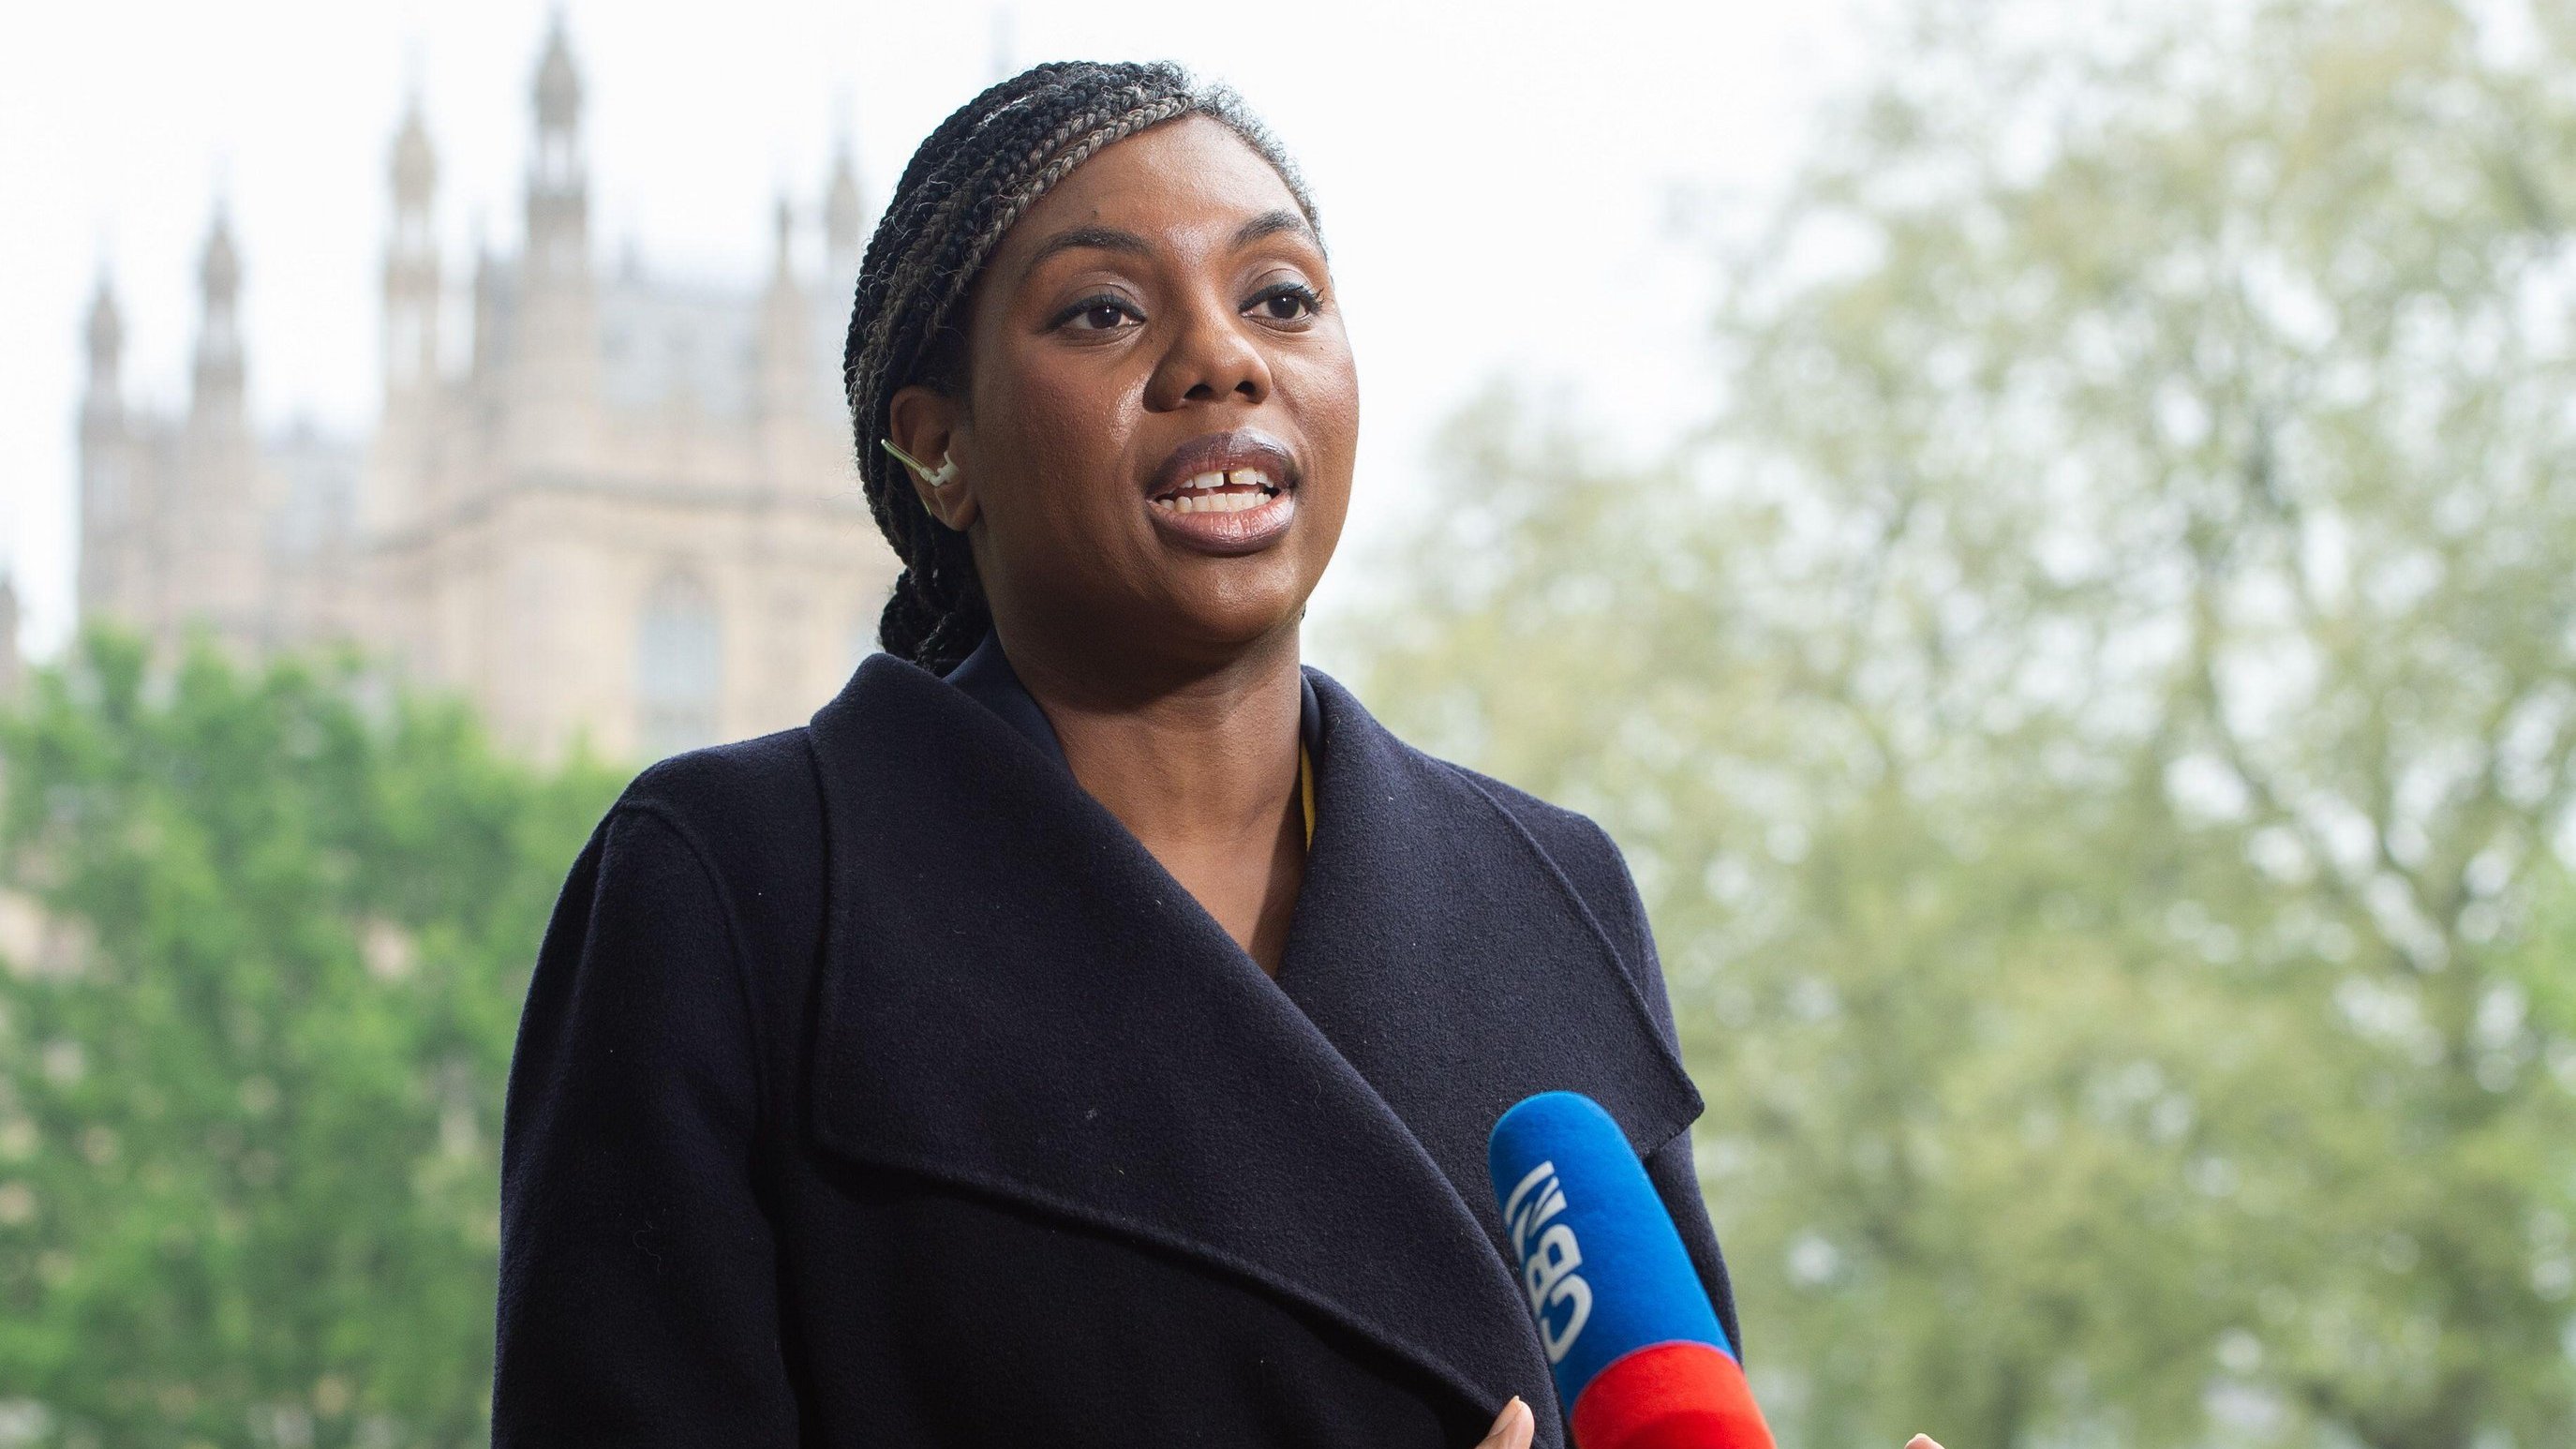 Kemi Badenoch is said to be concerned about developing countries pushing for reparations for slavery